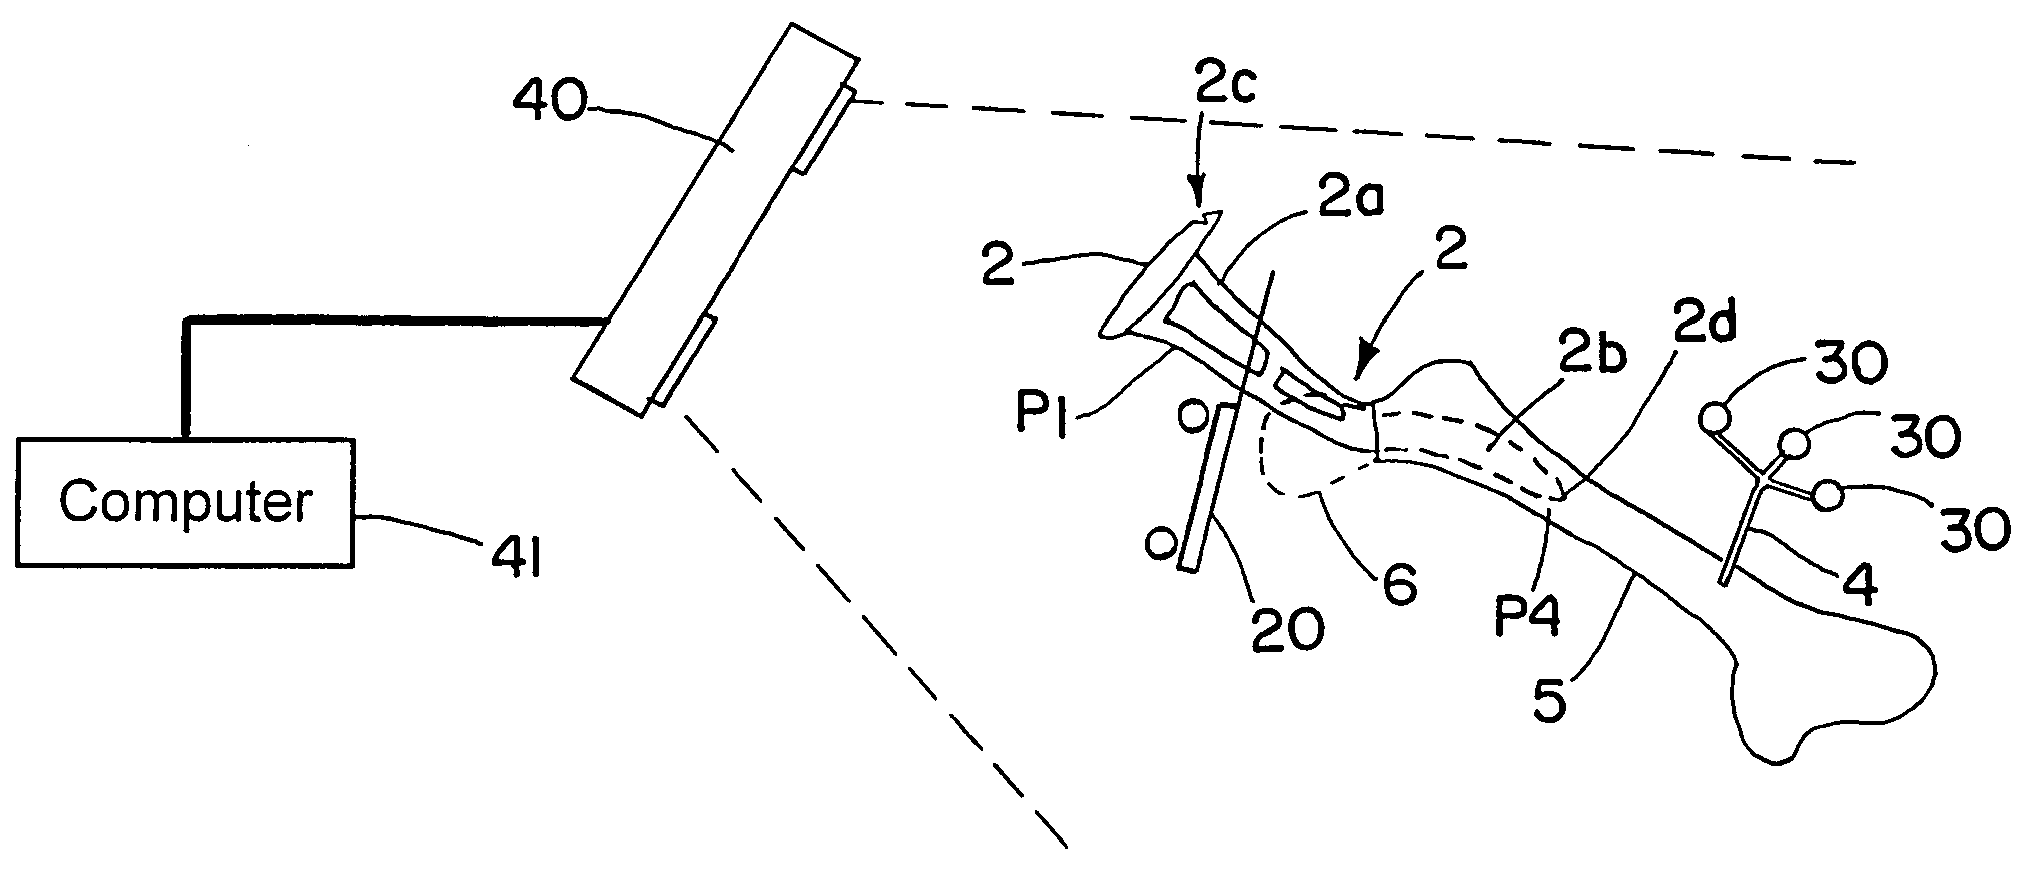 Method and system for determining the location of a medical instrument relative to a body structure